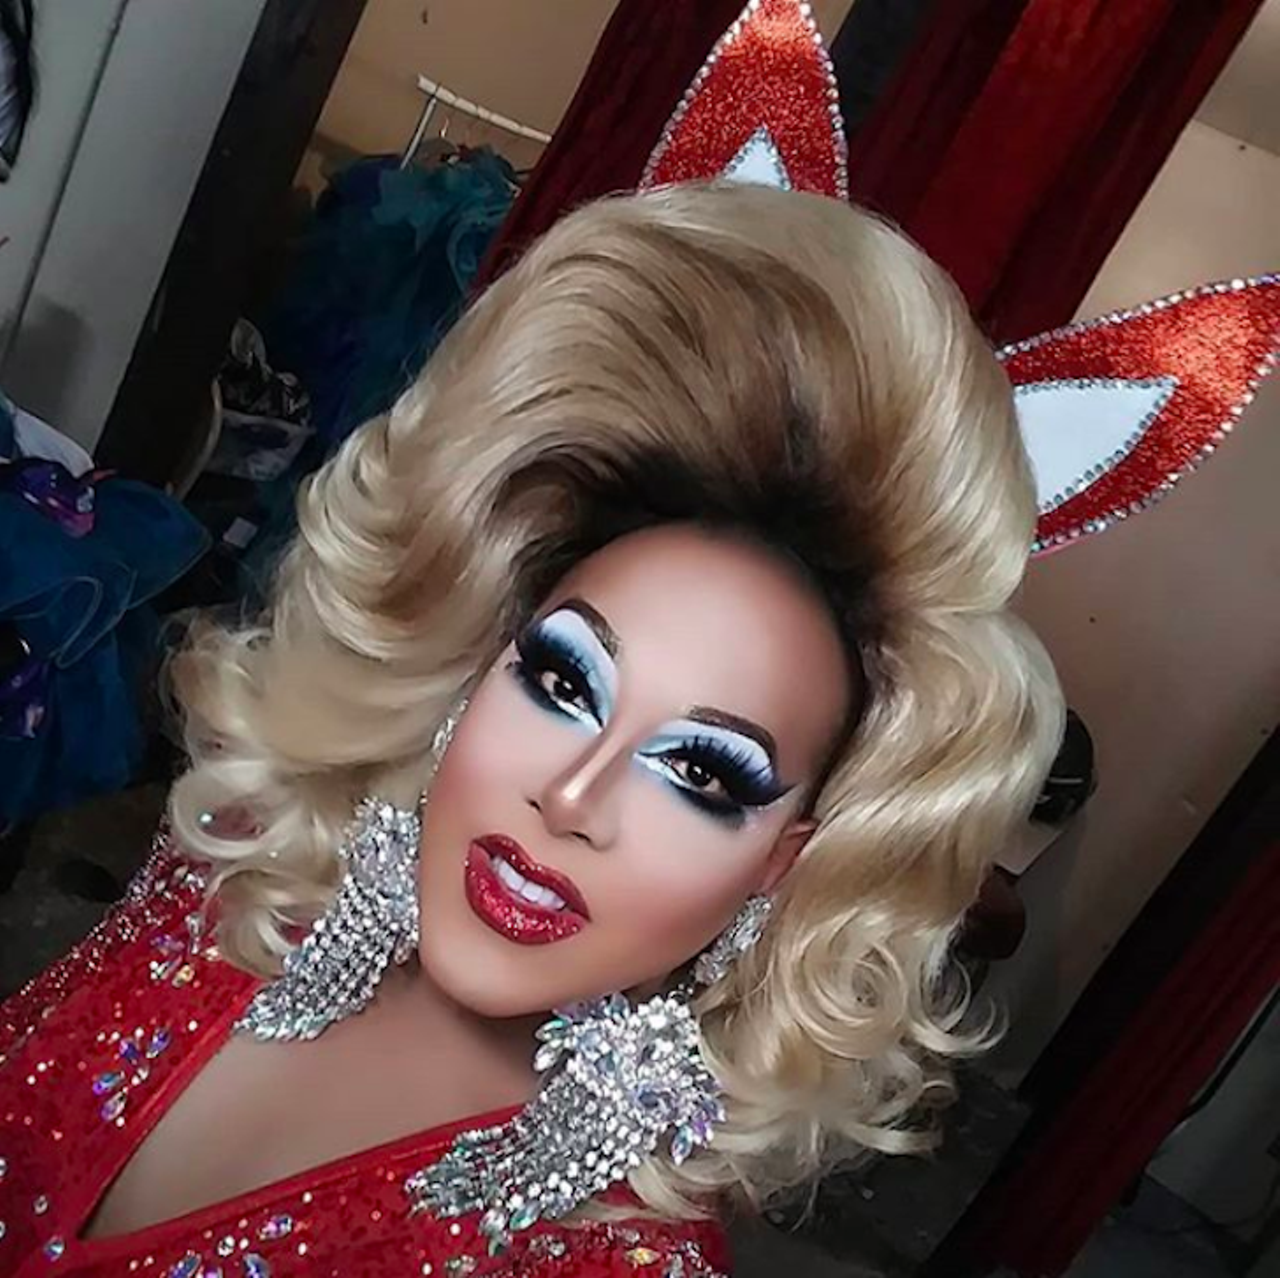 @miss_alexis_mateo
Super star drag queen Alexis Mateo named Miss Gay Florida. For all things fierce, you must give her a follow.